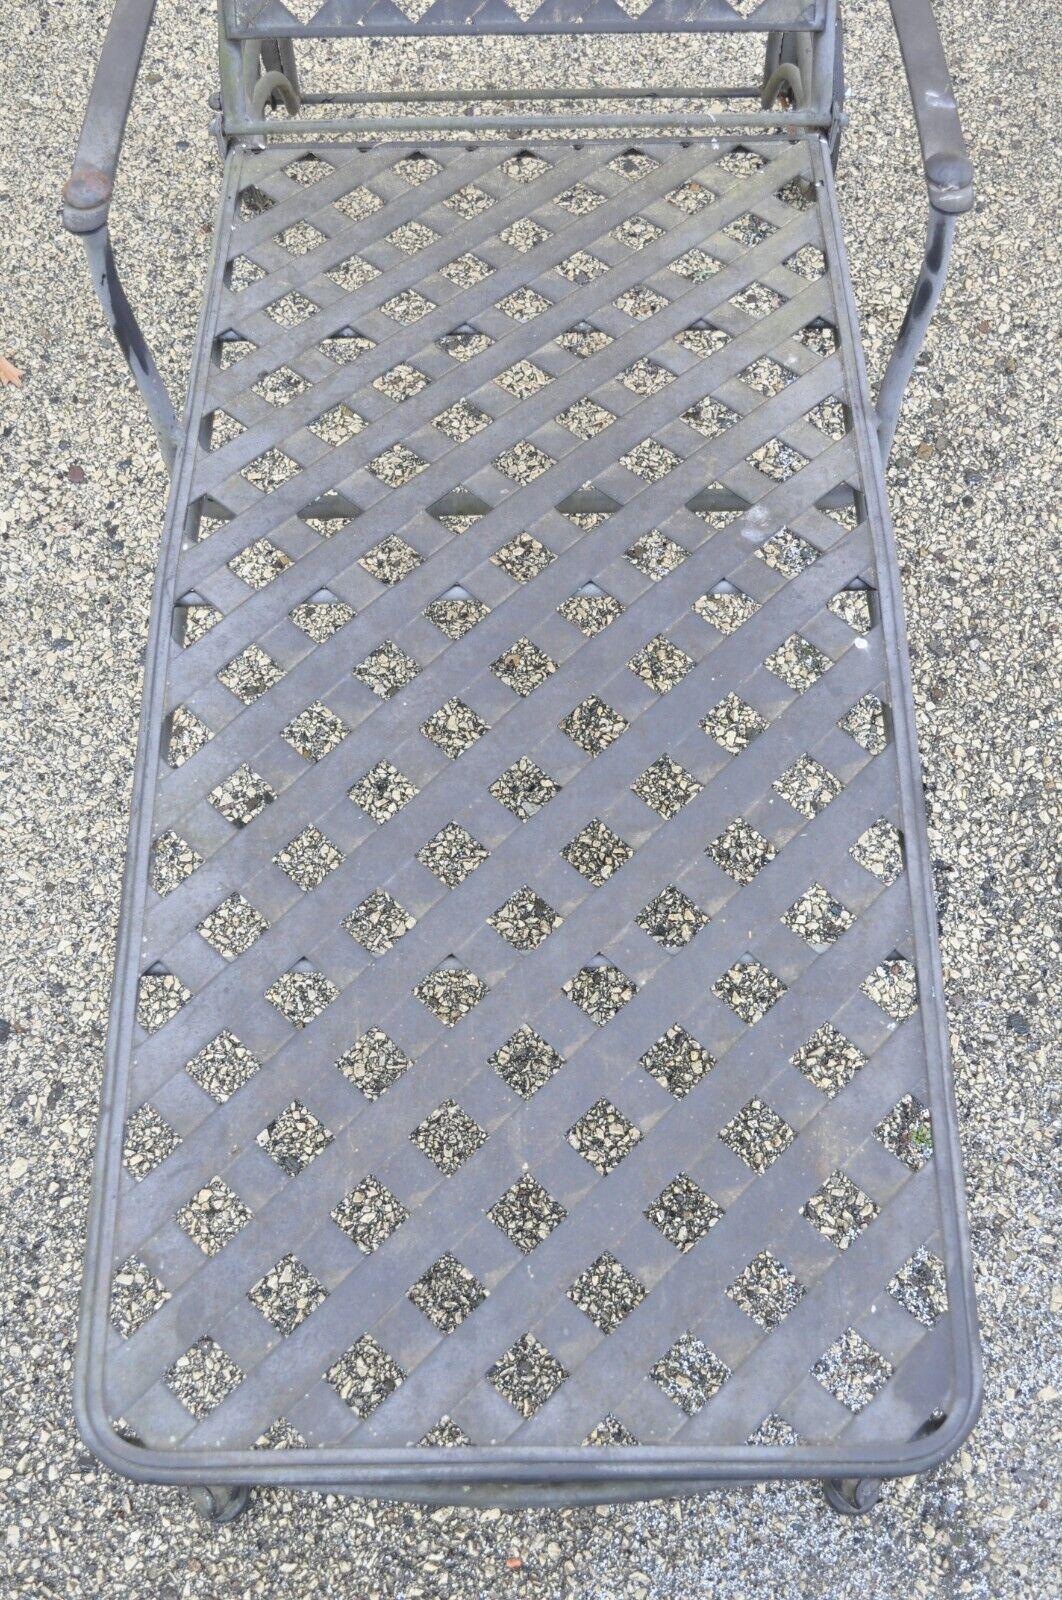 Woodard Maddox Black Wrought Iron Adjustable Pool Patio Chaise Lounge Chair In Good Condition For Sale In Philadelphia, PA